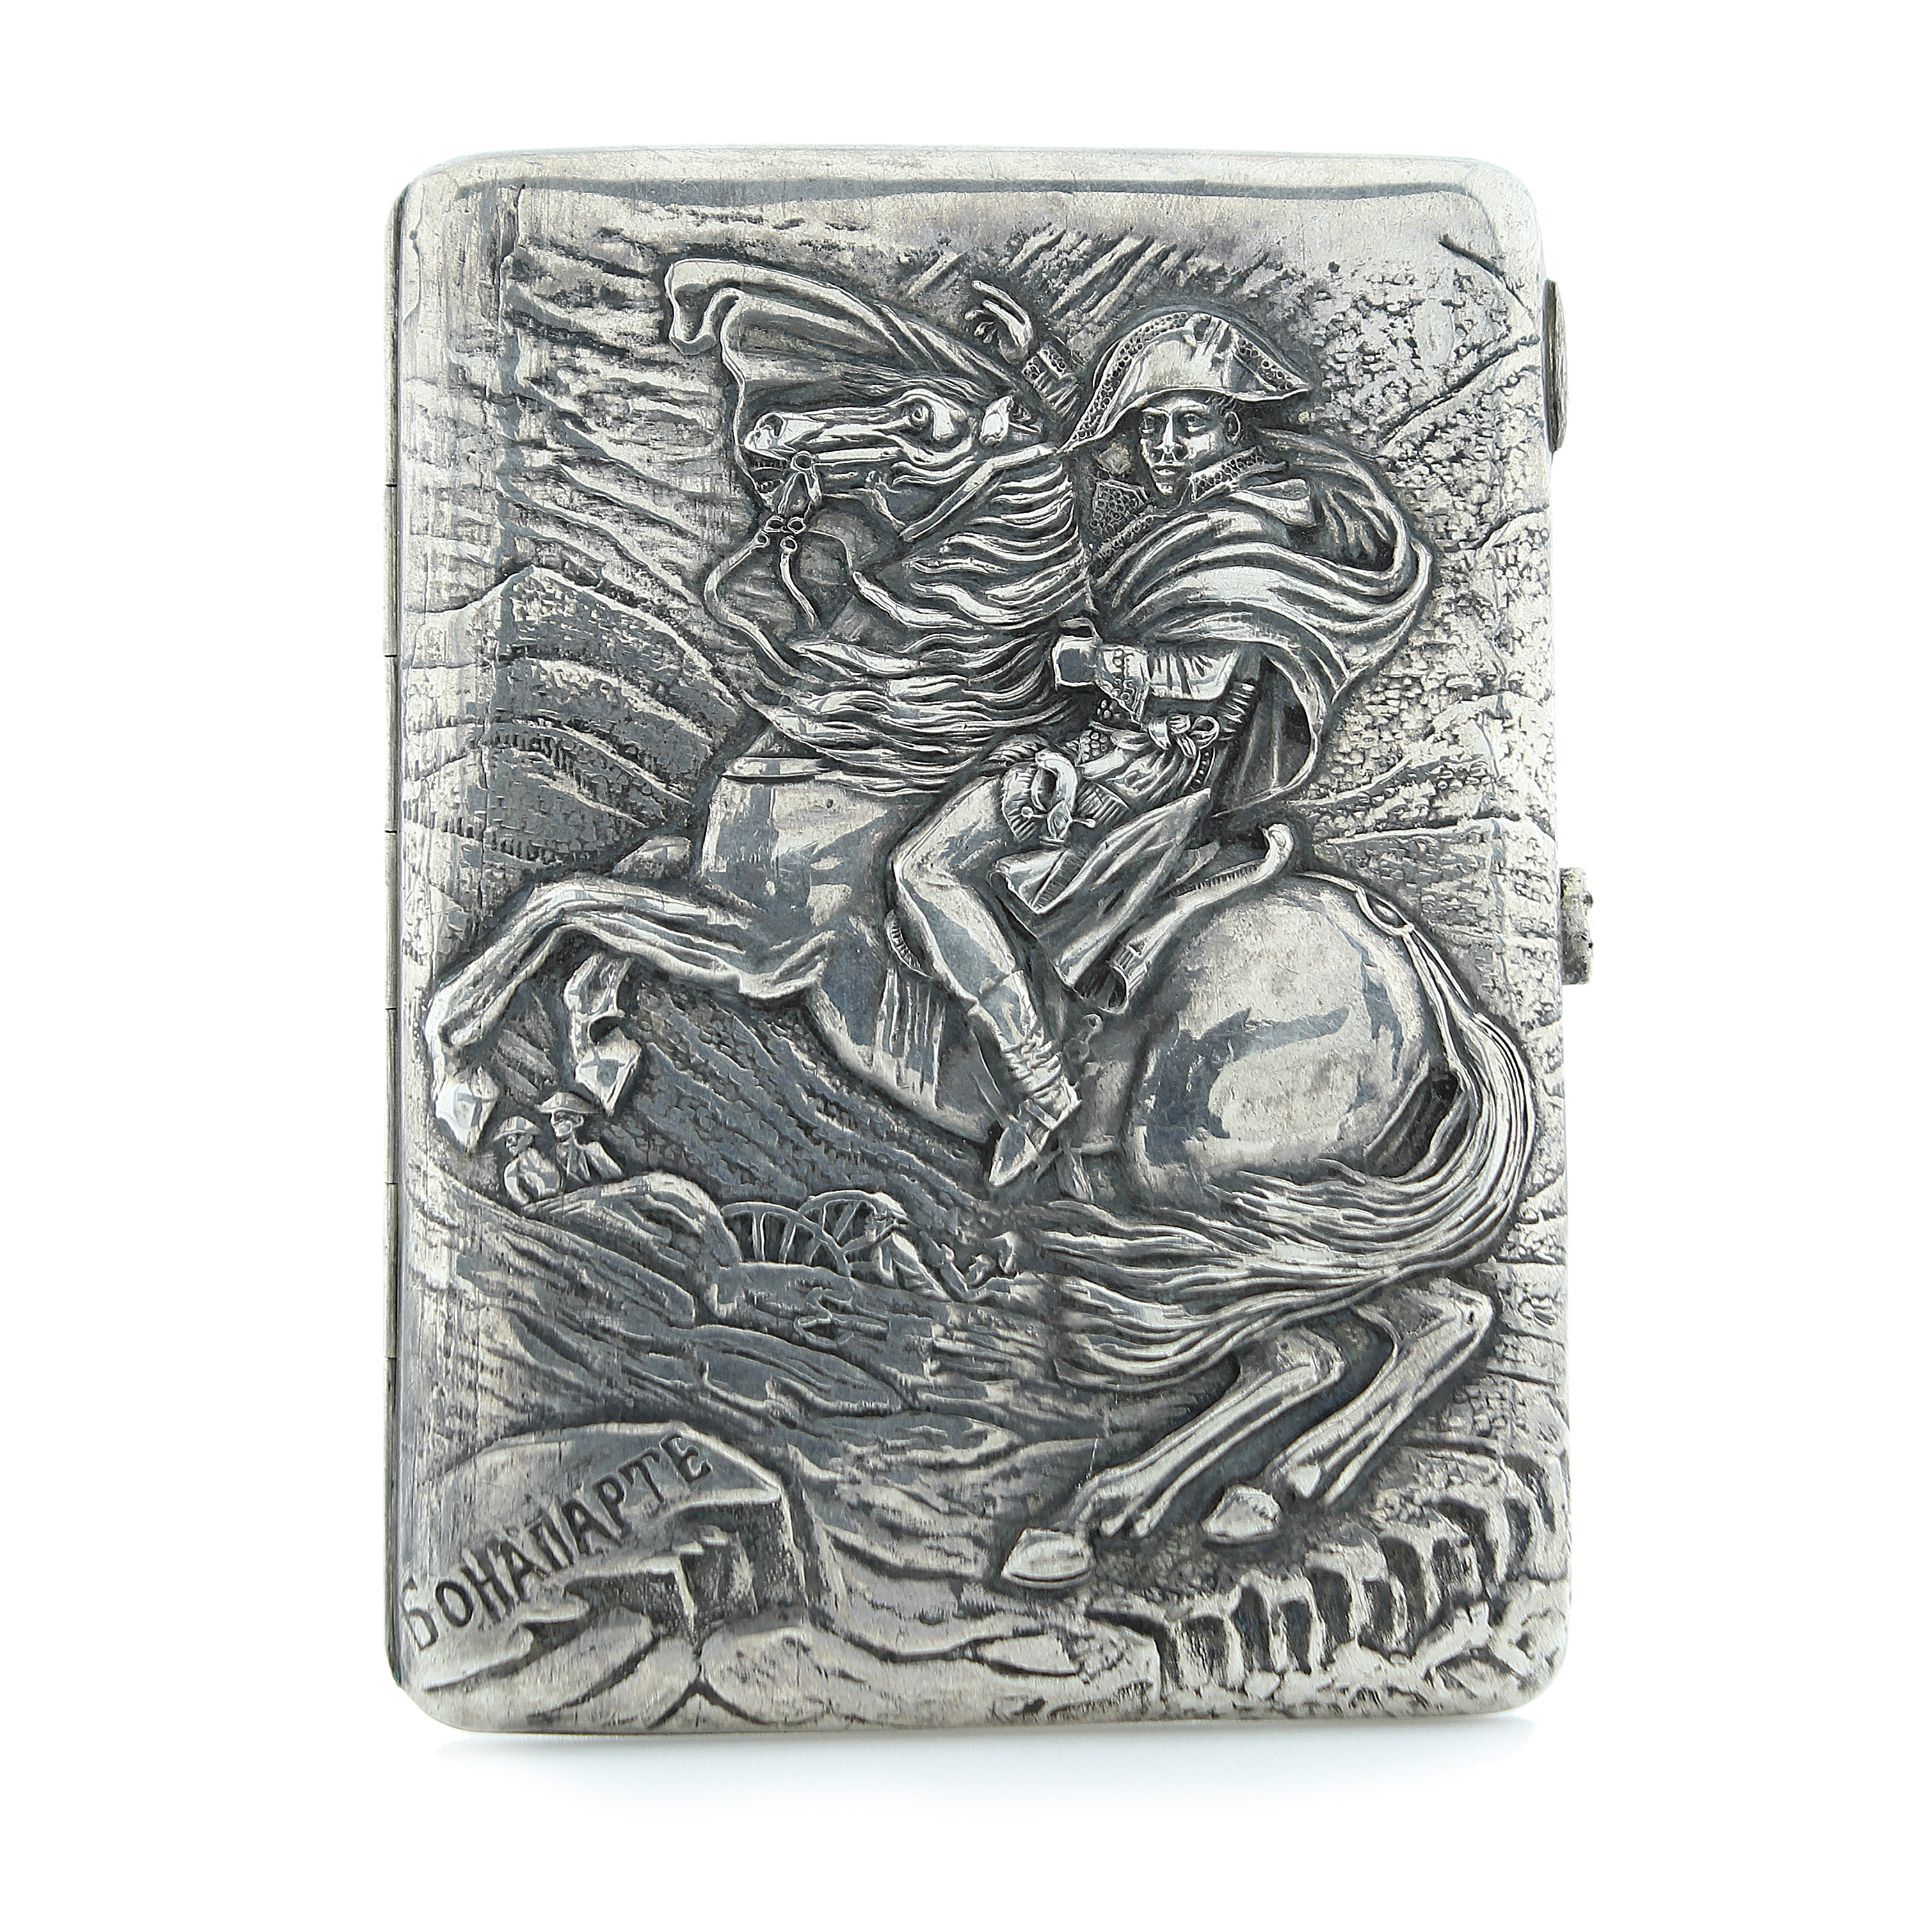 AN ANTIQUE RUSSIAN SILVER CIGARETTE CASE of rounded rectangular form, with a high relief chased